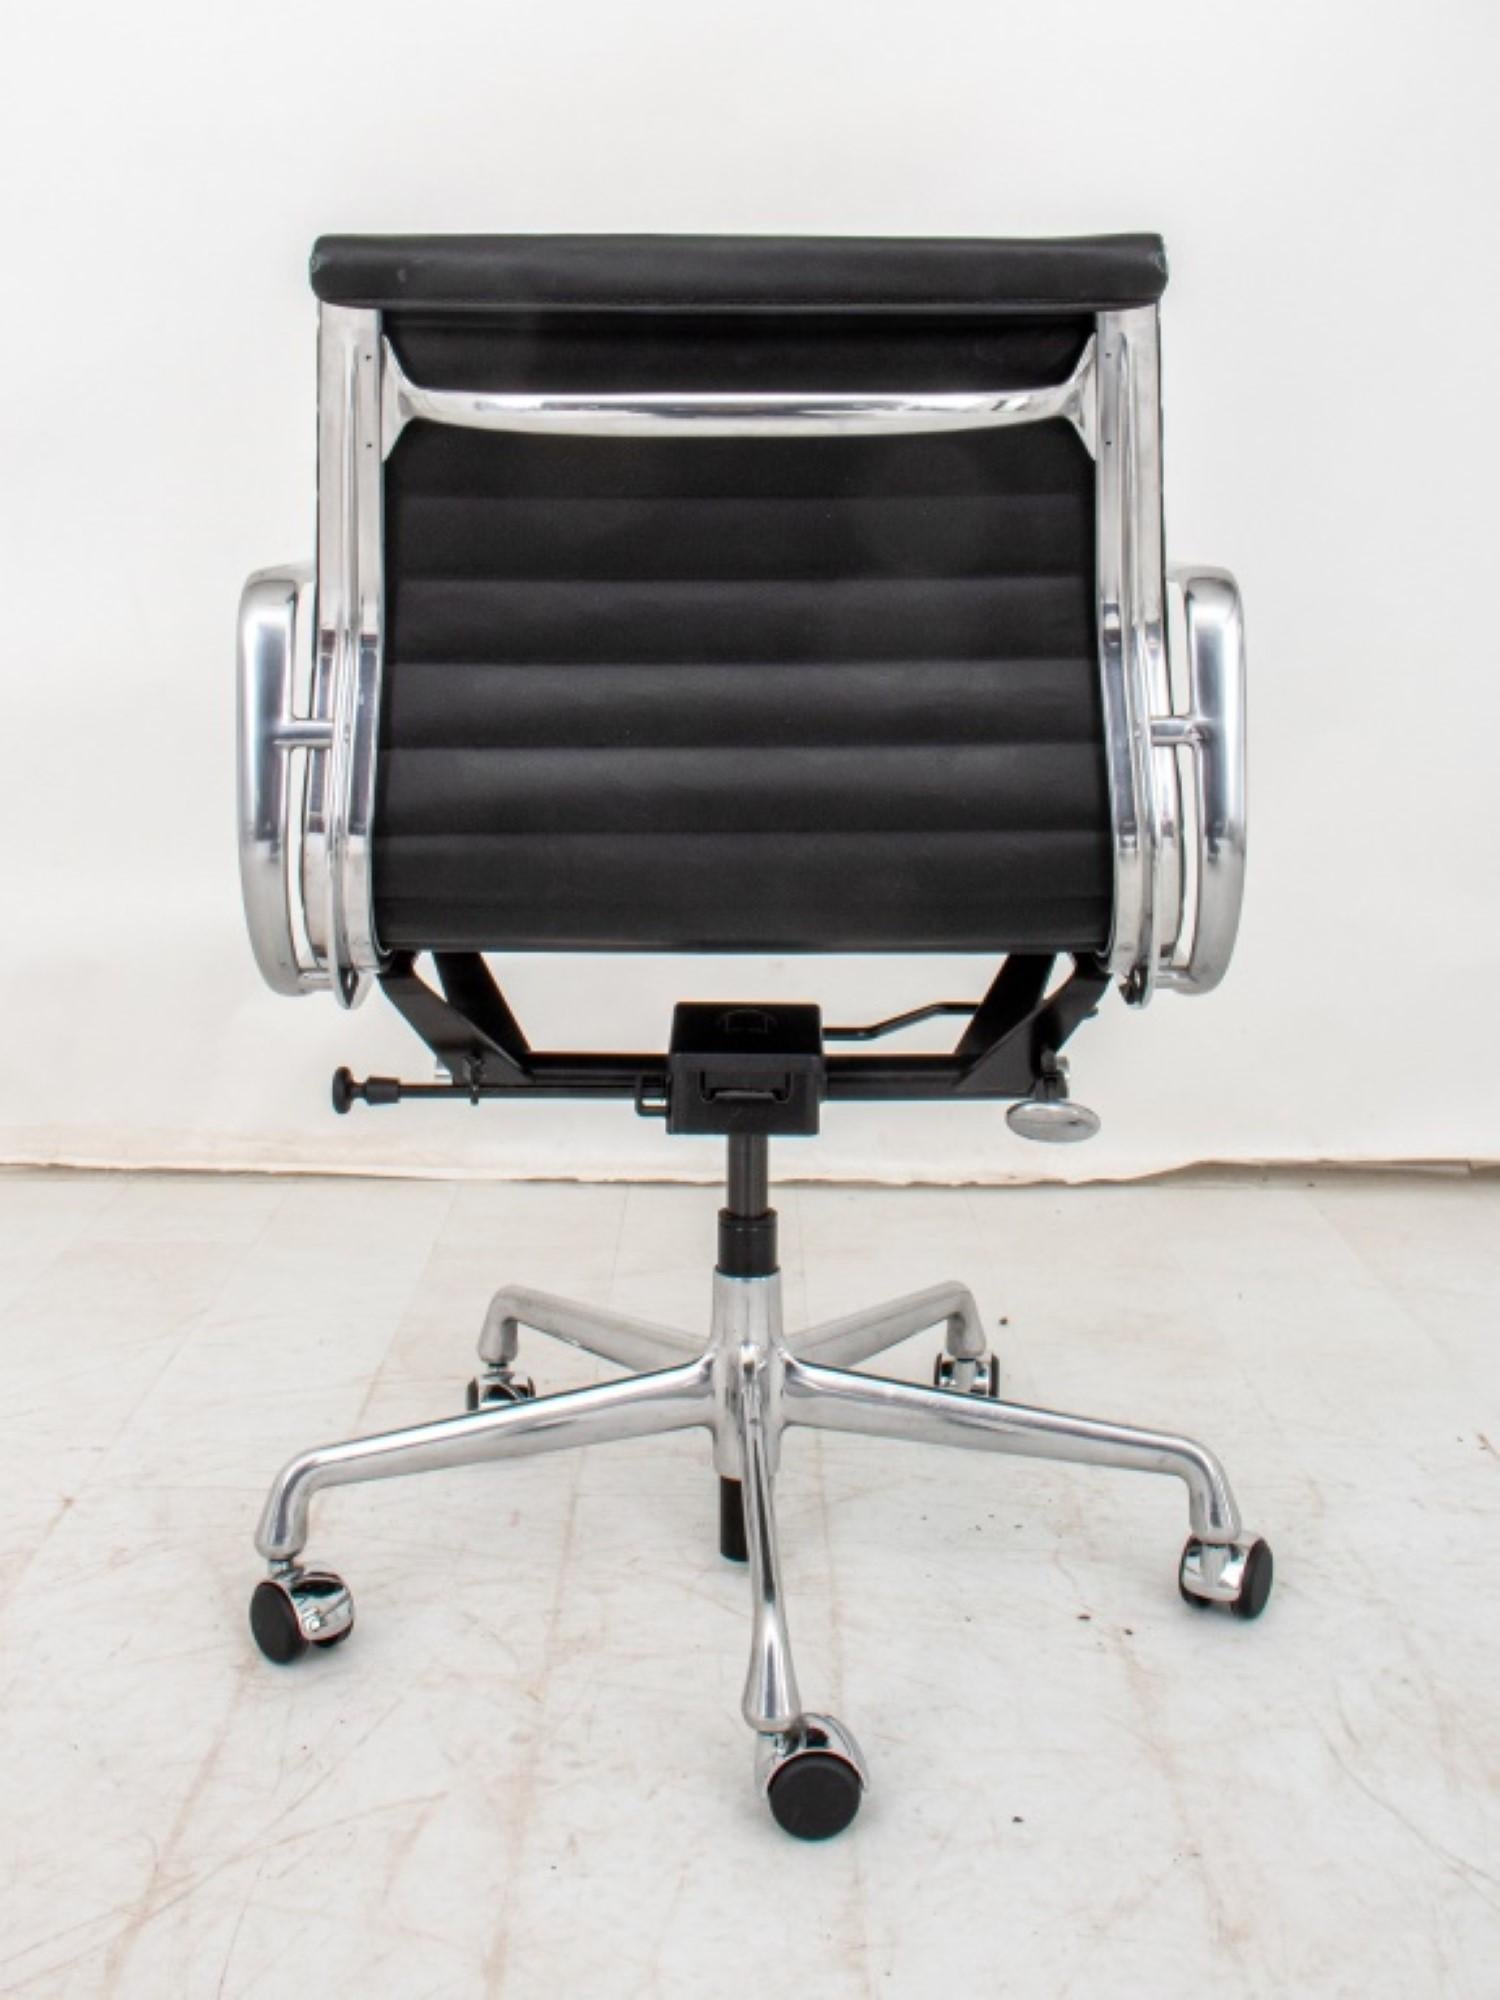 The Charles and Ray Eames for Herman Miller Chrome and Ribbed Vinyl Office Swivel Chair has overall dimensions of approximately 34.25 inches in height, 22.75 inches in width, and 21 inches in depth. This modern office chair is mounted on five